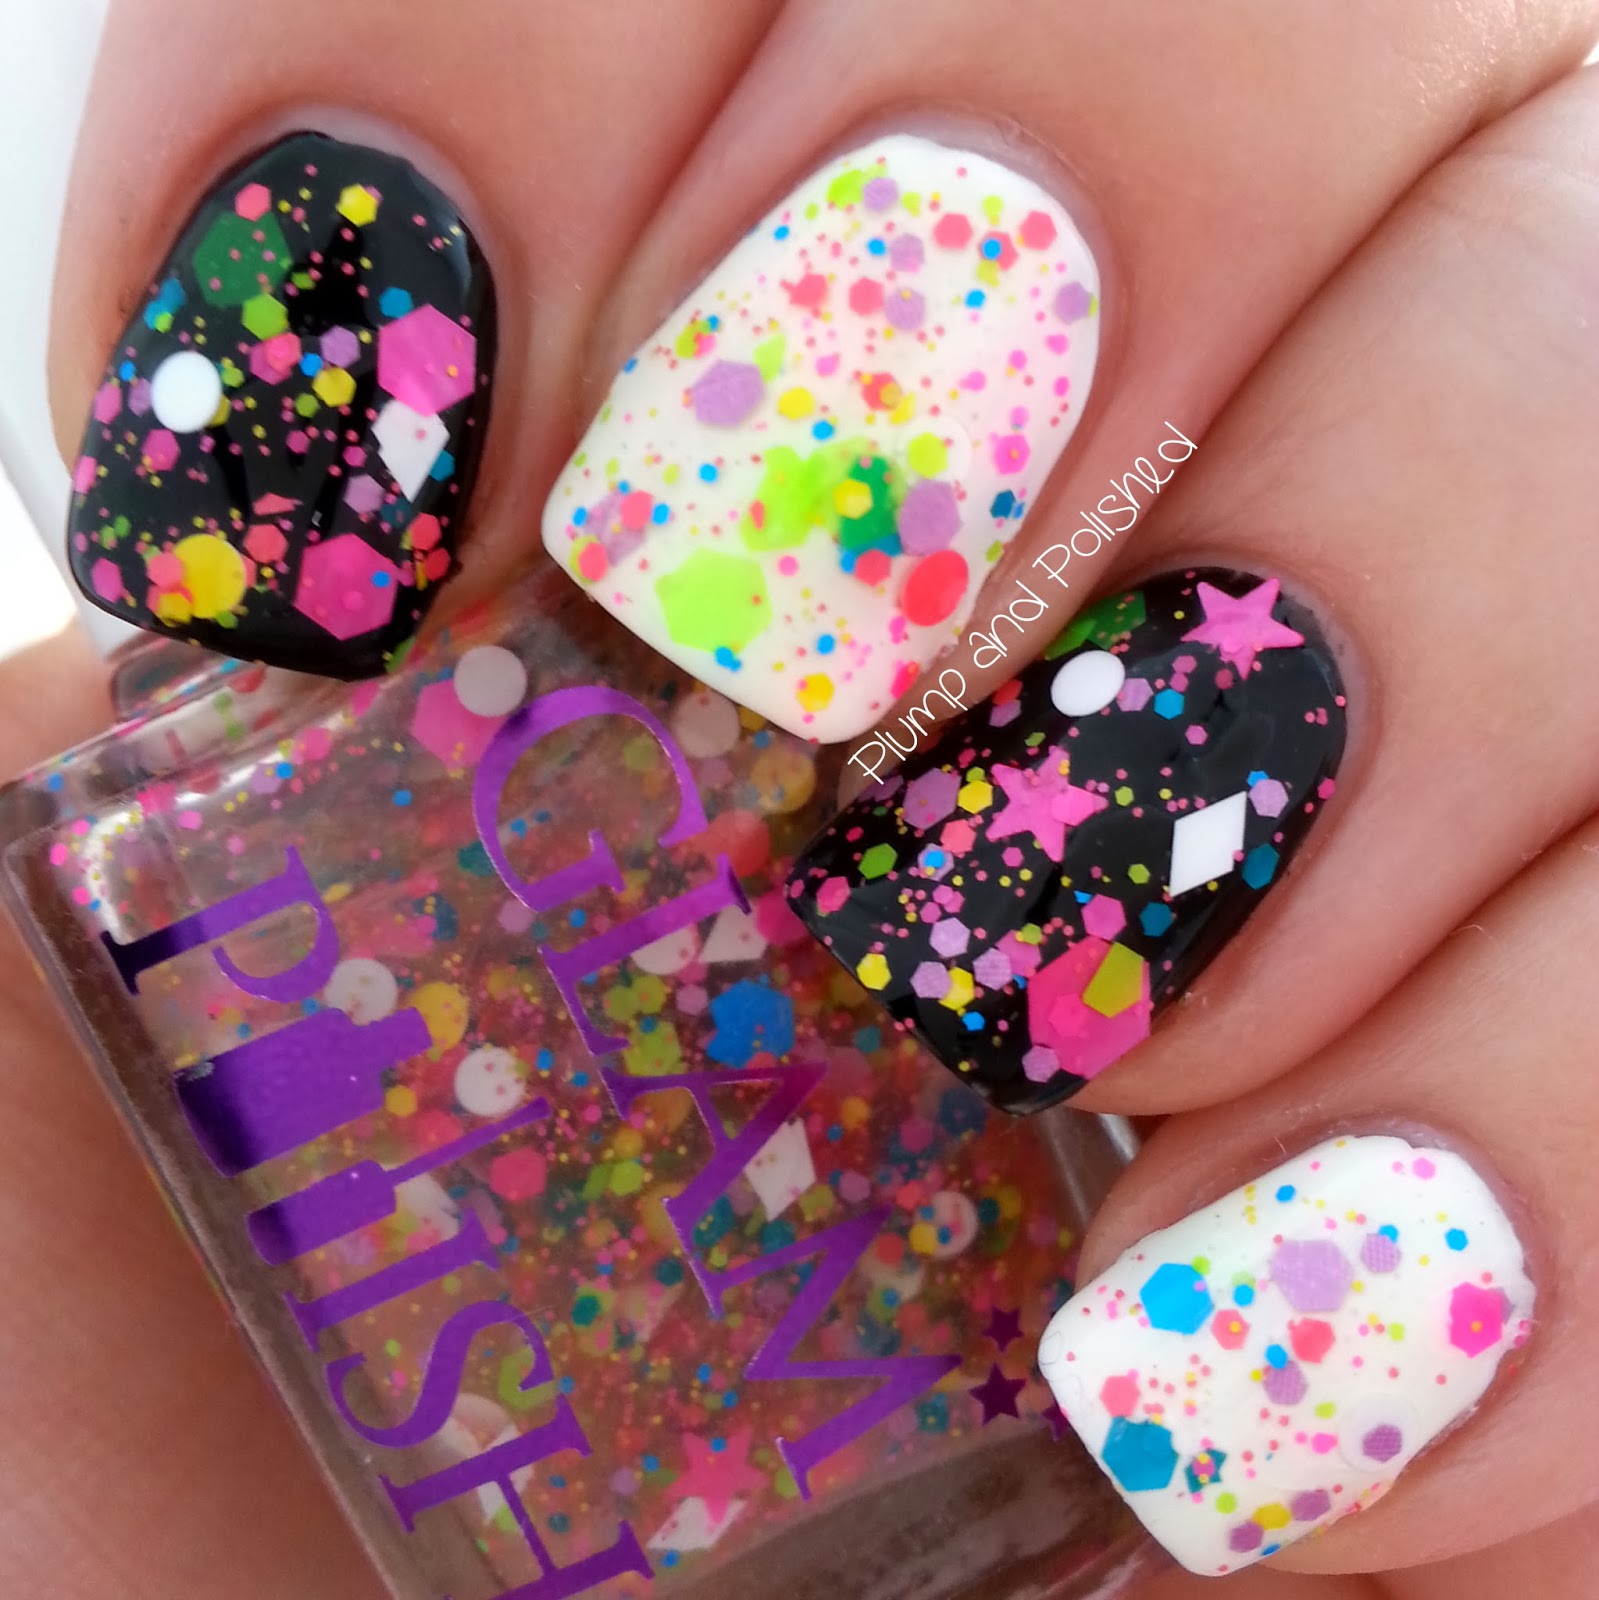 Plump and Polished: Glam Polish - Pacman and Candyland